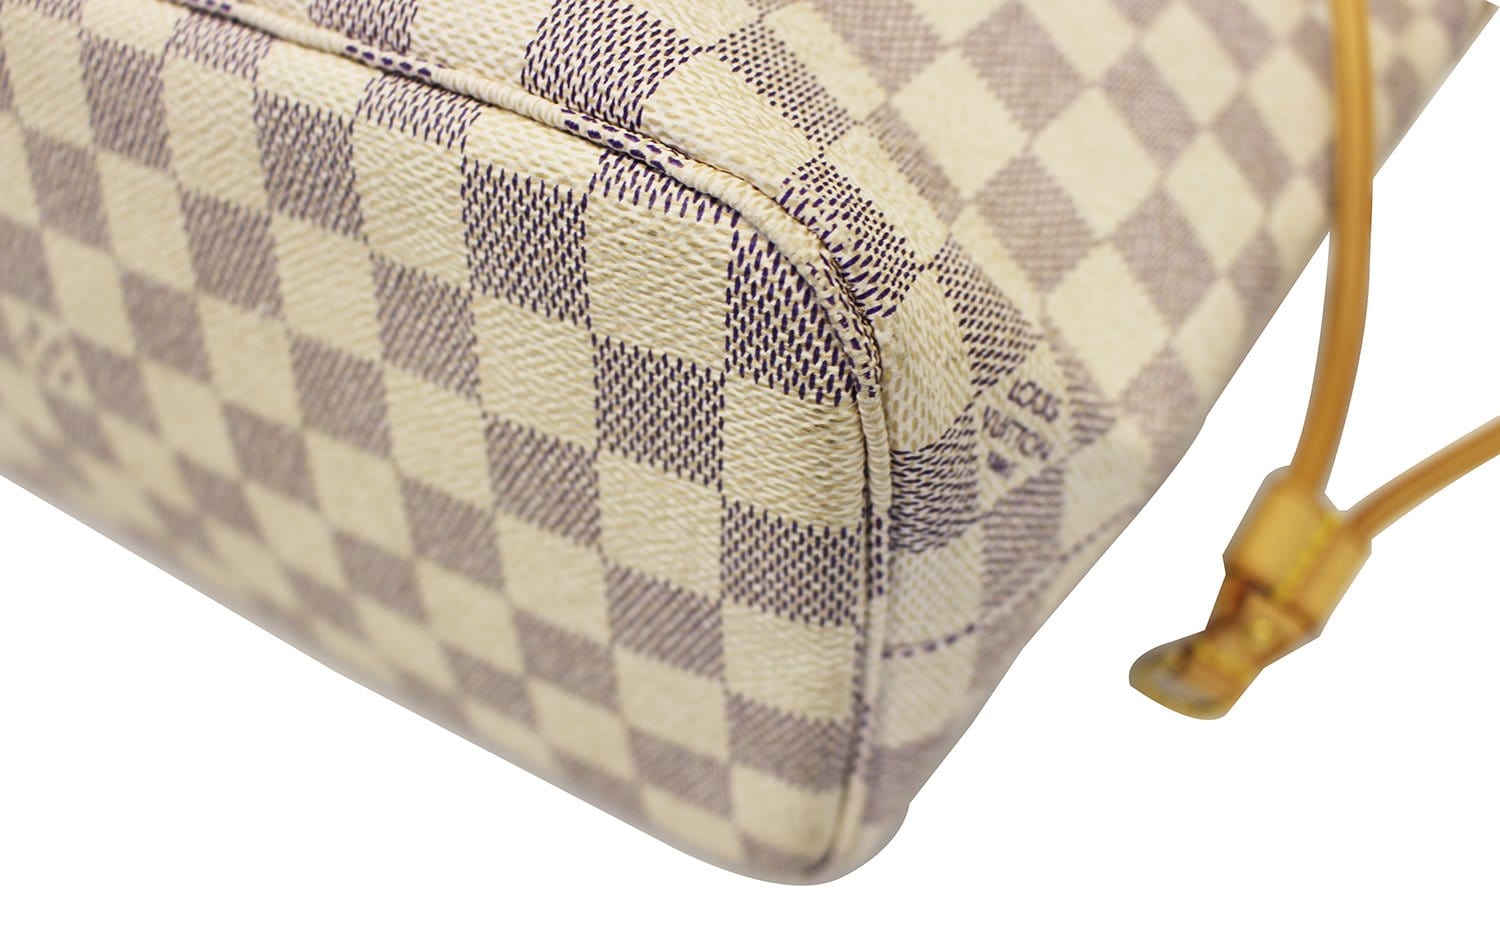 Louis Vuitton Small Damier Azur Neverfull PM Tote Bag 1lv53a For